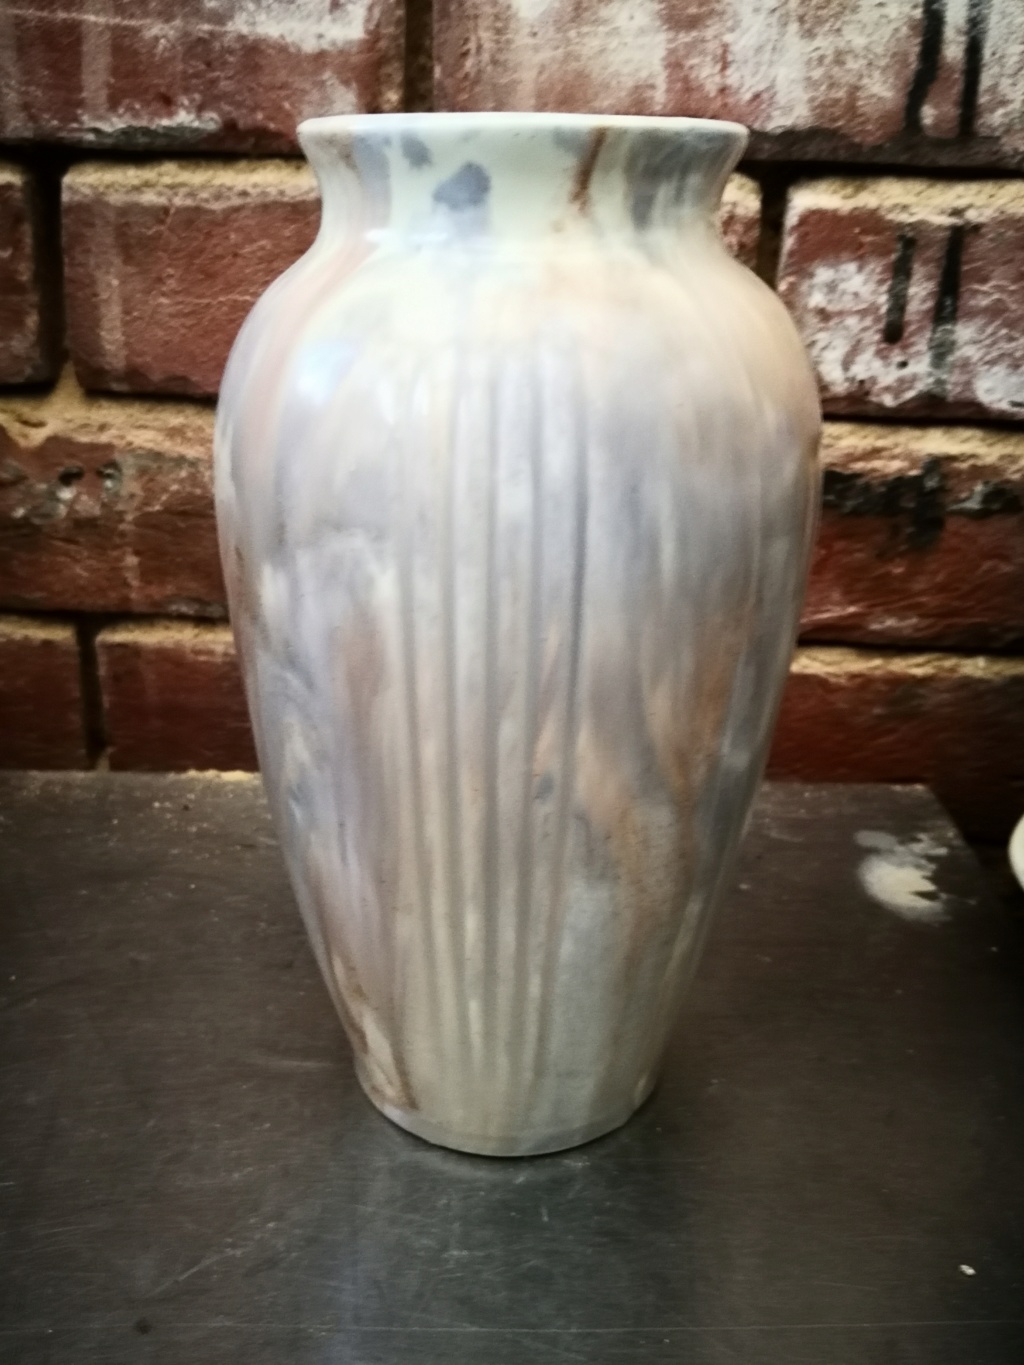 marble effect drip glaze ribbed vase, looks a bit 1930s Img_2042